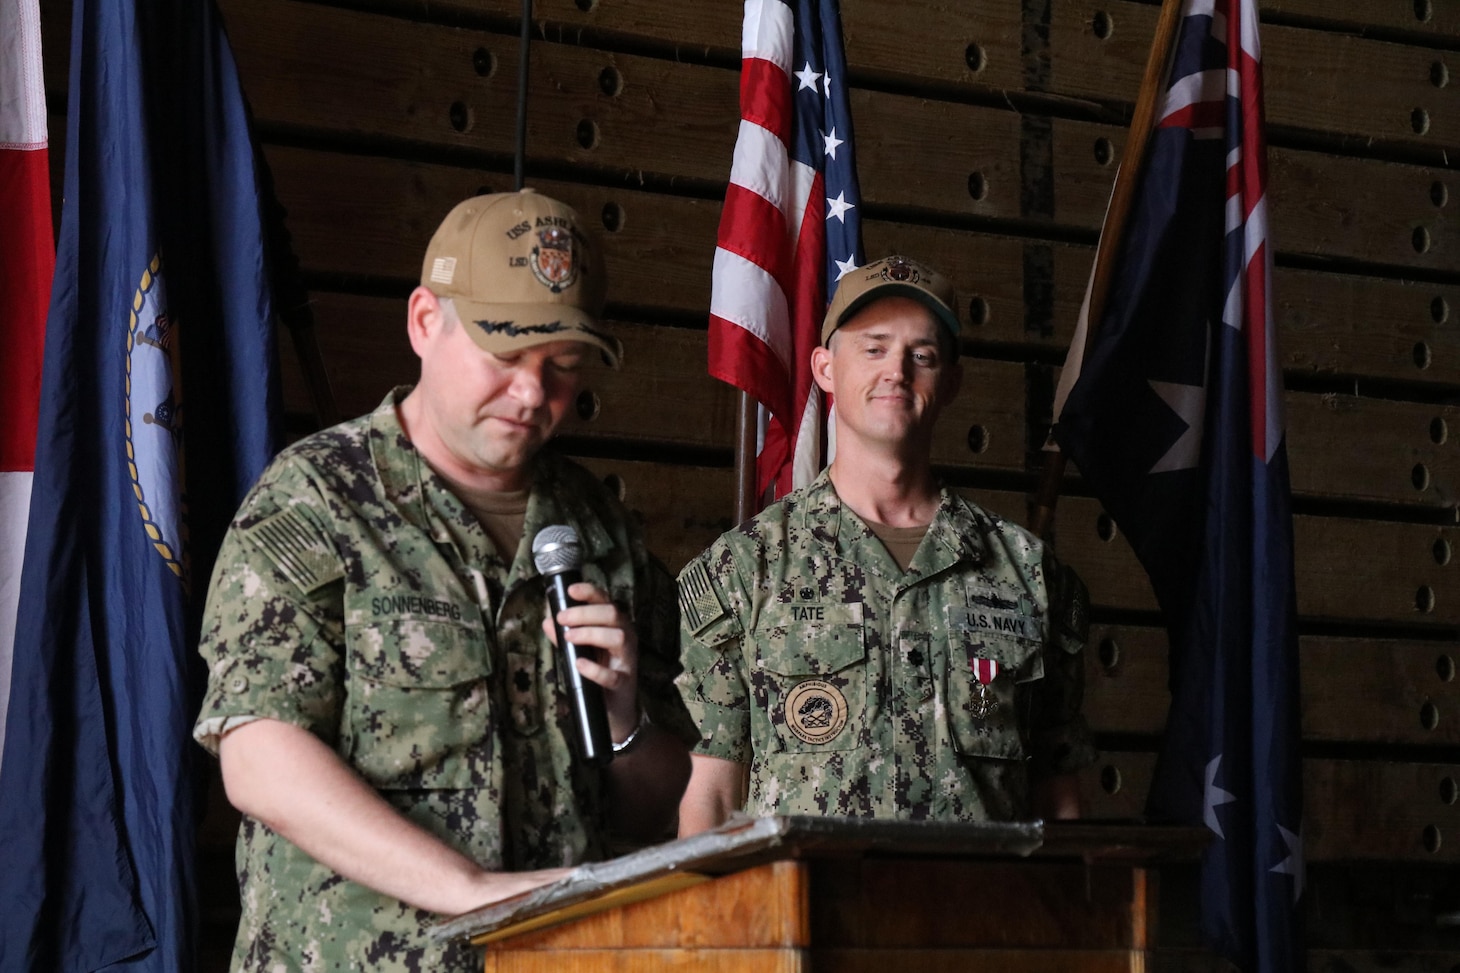 DARWIN, Australia (May 11, 2022) Cmdr. Dirk Sonnenberg, left, 22nd commanding officer of the forward-deployed amphibious dock landing ship USS Ashland (LSD 48), reads his orders during Ashland’s change-of-command ceremony, May 11 in Australia. Ashland, part of Amphibious Squadron 11, is operating in the U.S. 7th Fleet area of responsibility to enhance interoperability with allies and partners, and serve as a ready response force to defend peace and stability in the Indo-Pacific region. (U.S. Navy photo by Lt. j.g. John Malik)